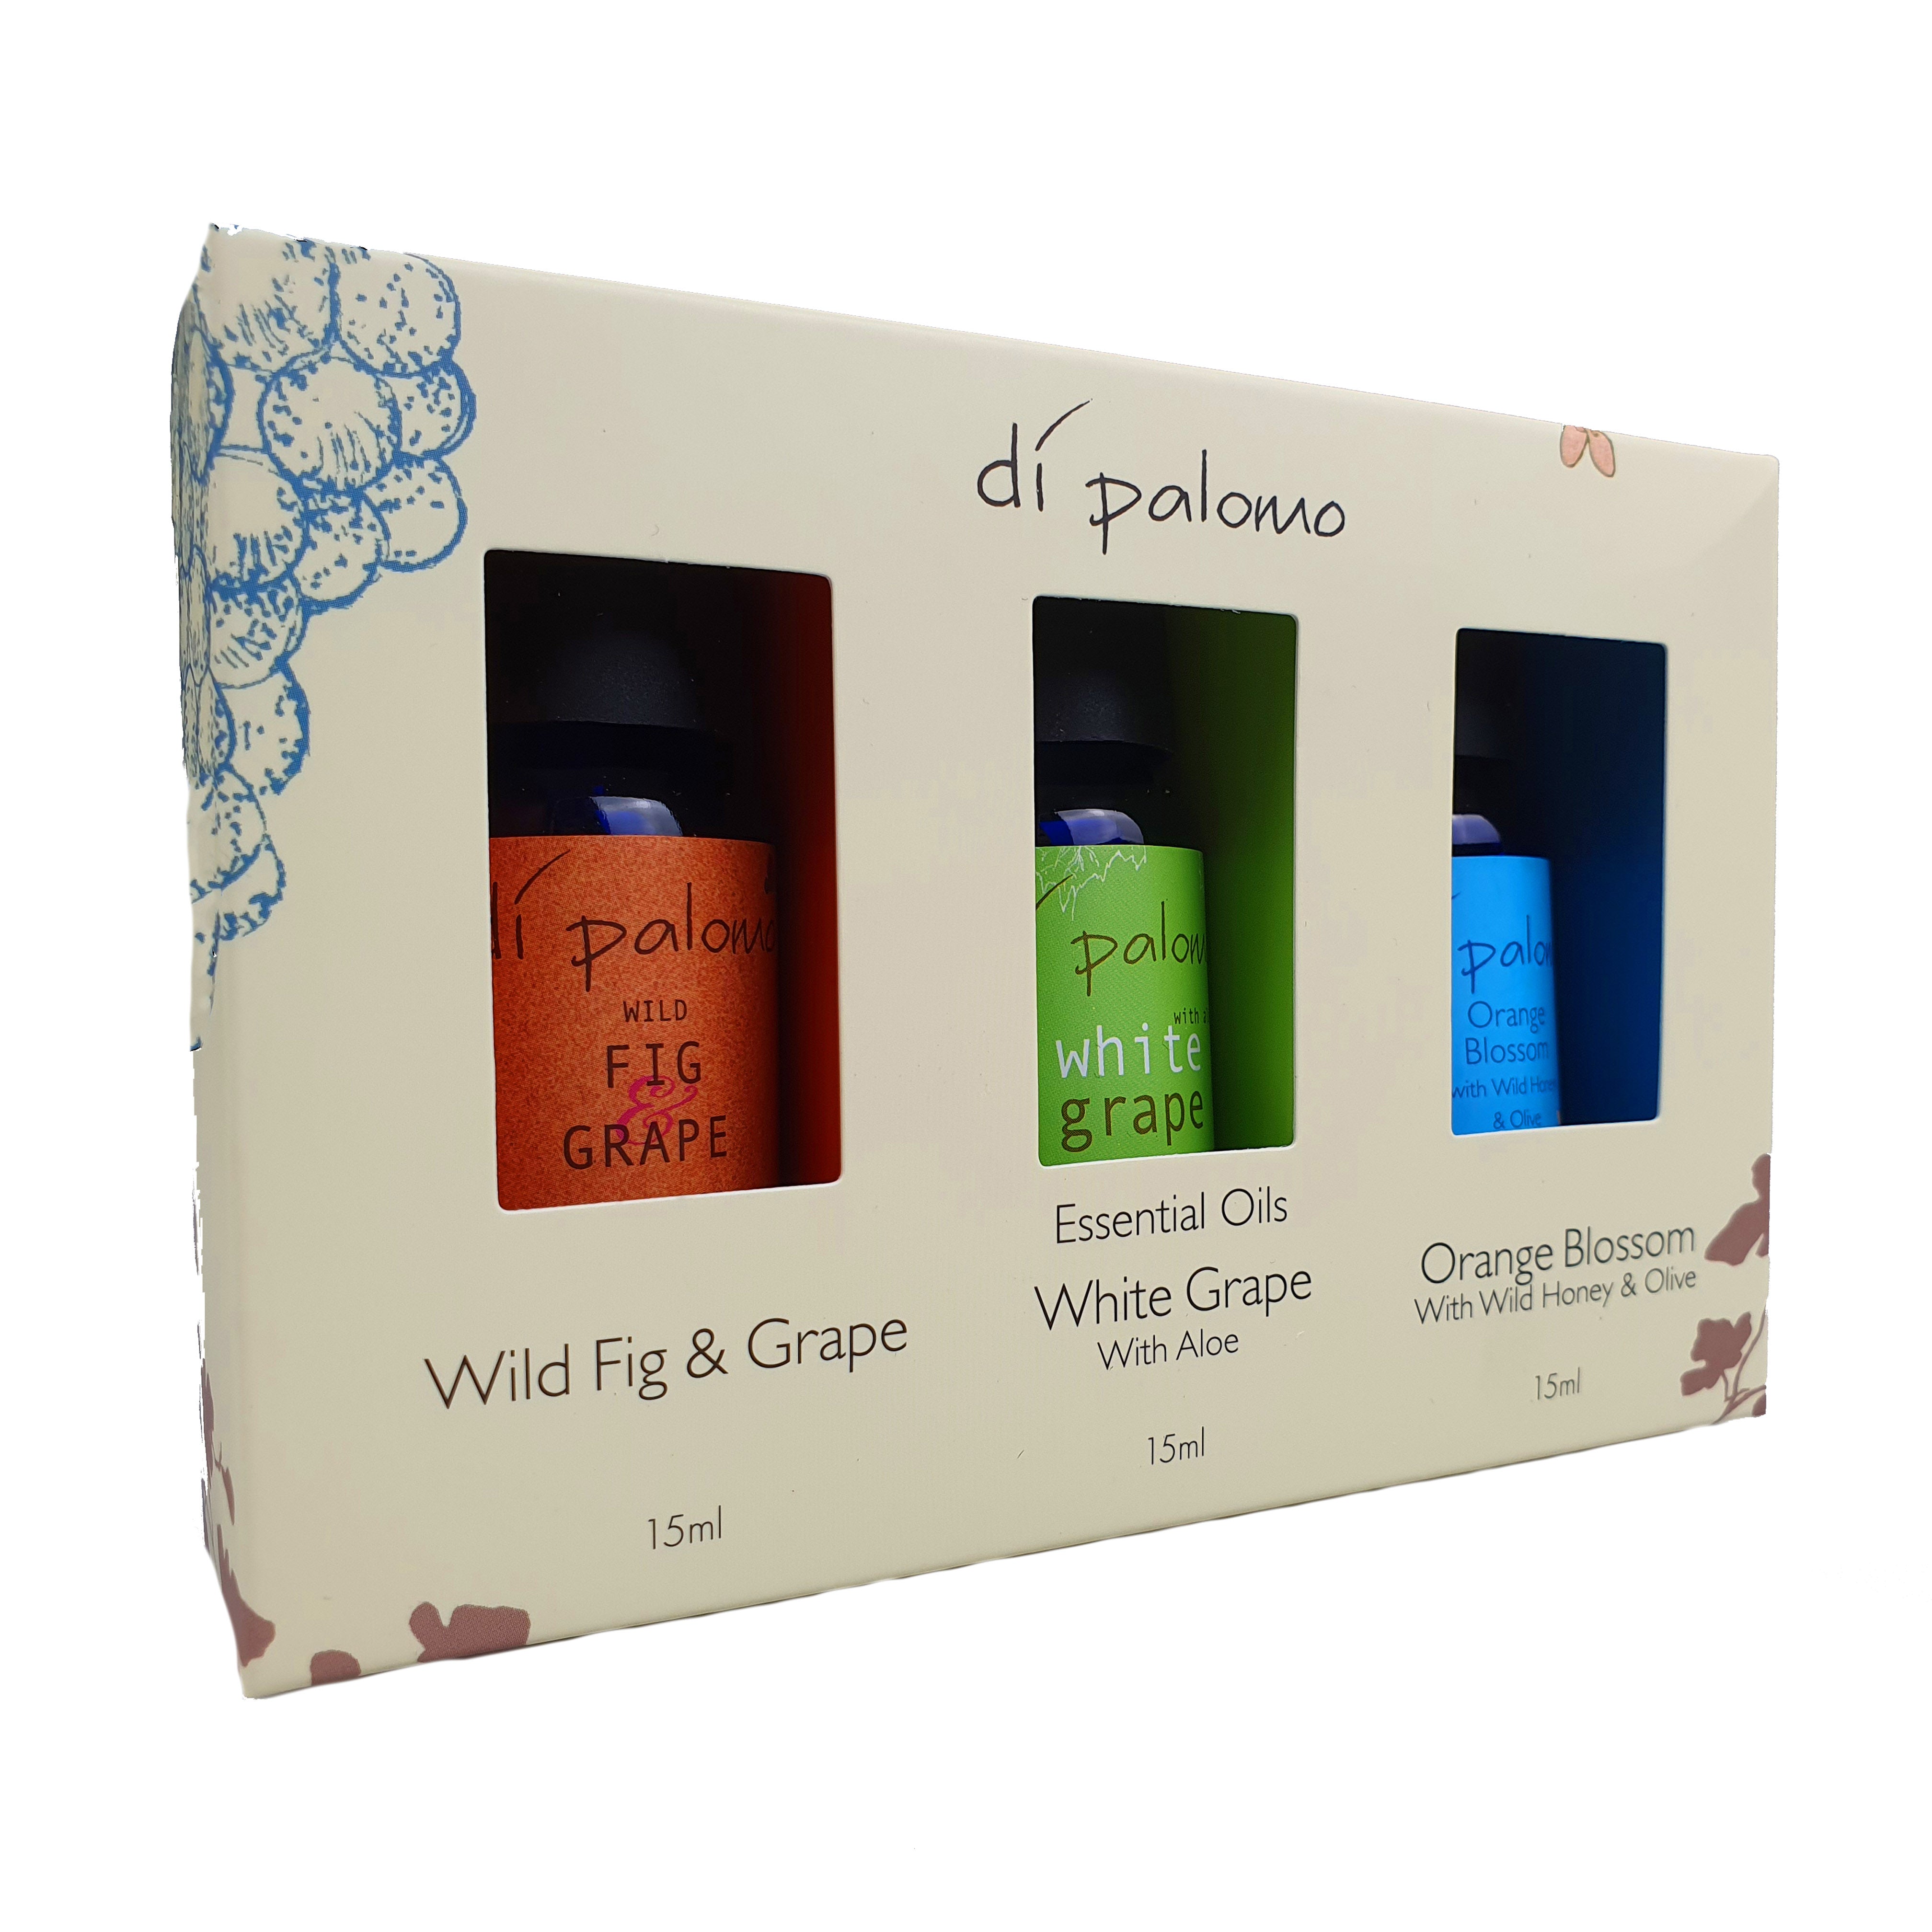 Our three core fragrances blended with premium fragrance oils to both fragrance your home and aid with meditation and Aromatherapy.